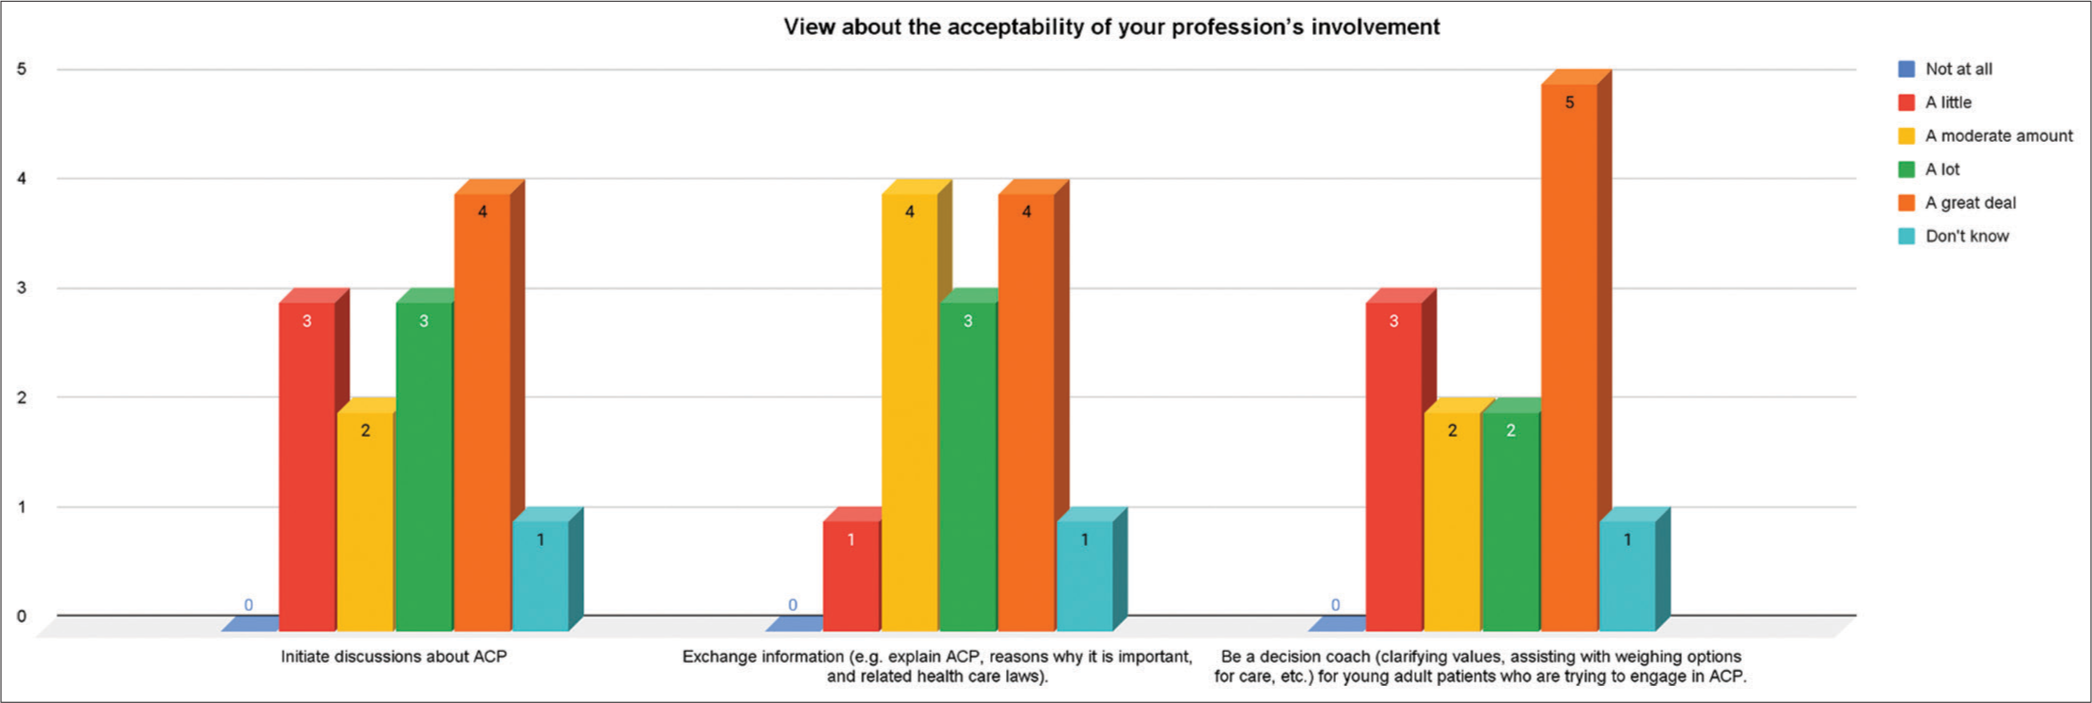 Acceptability of Profession’s Involvement in Advance Care Planning (ACP) Discussions.